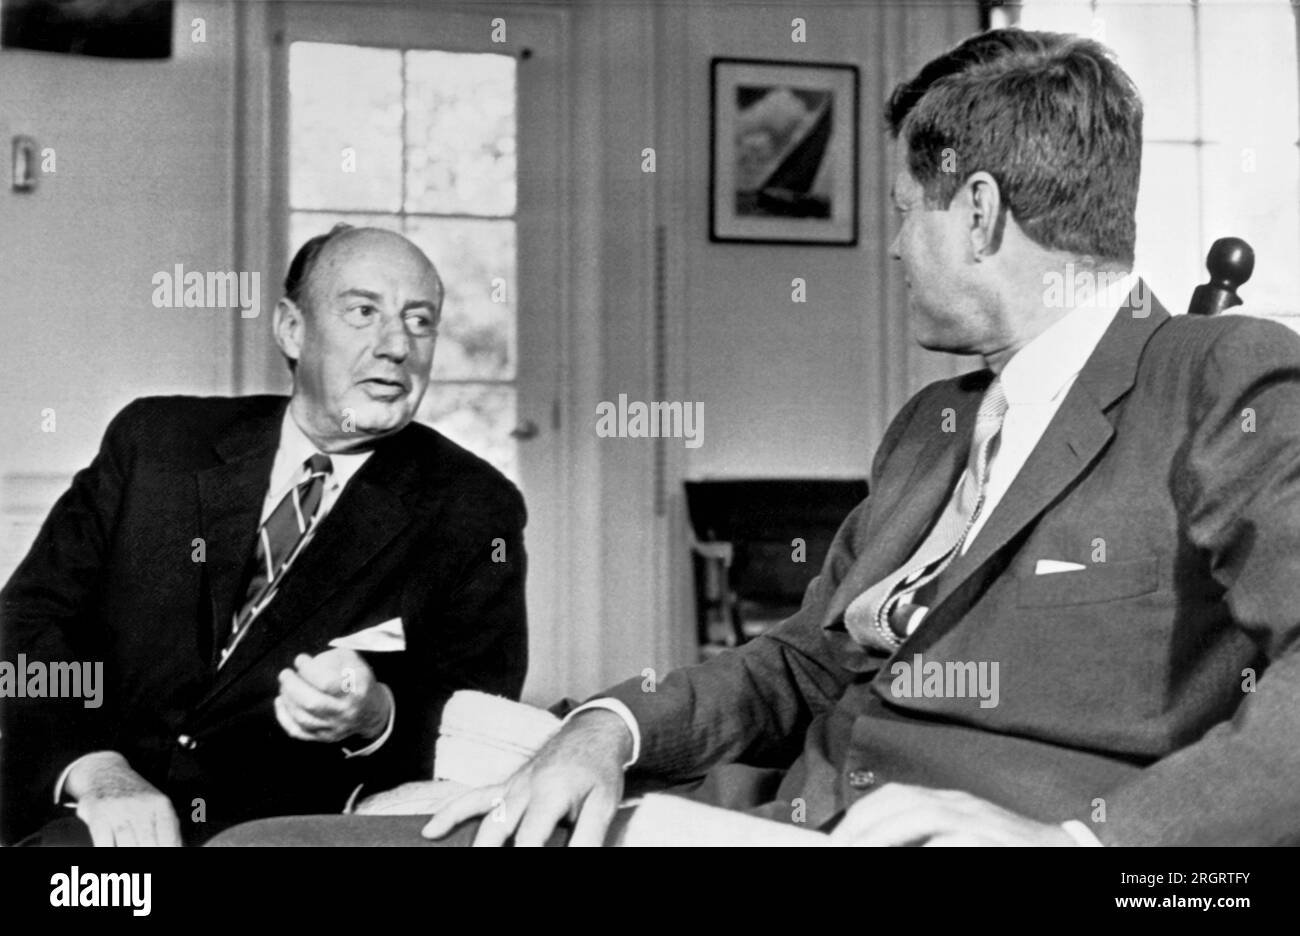 Washington, D.C.:  August 3, 1961 Adlai Stevenson, U.S. Ambassador to the United Nations, reports to President Kennedy today at the White House about his recent tour of Europe. Stock Photo